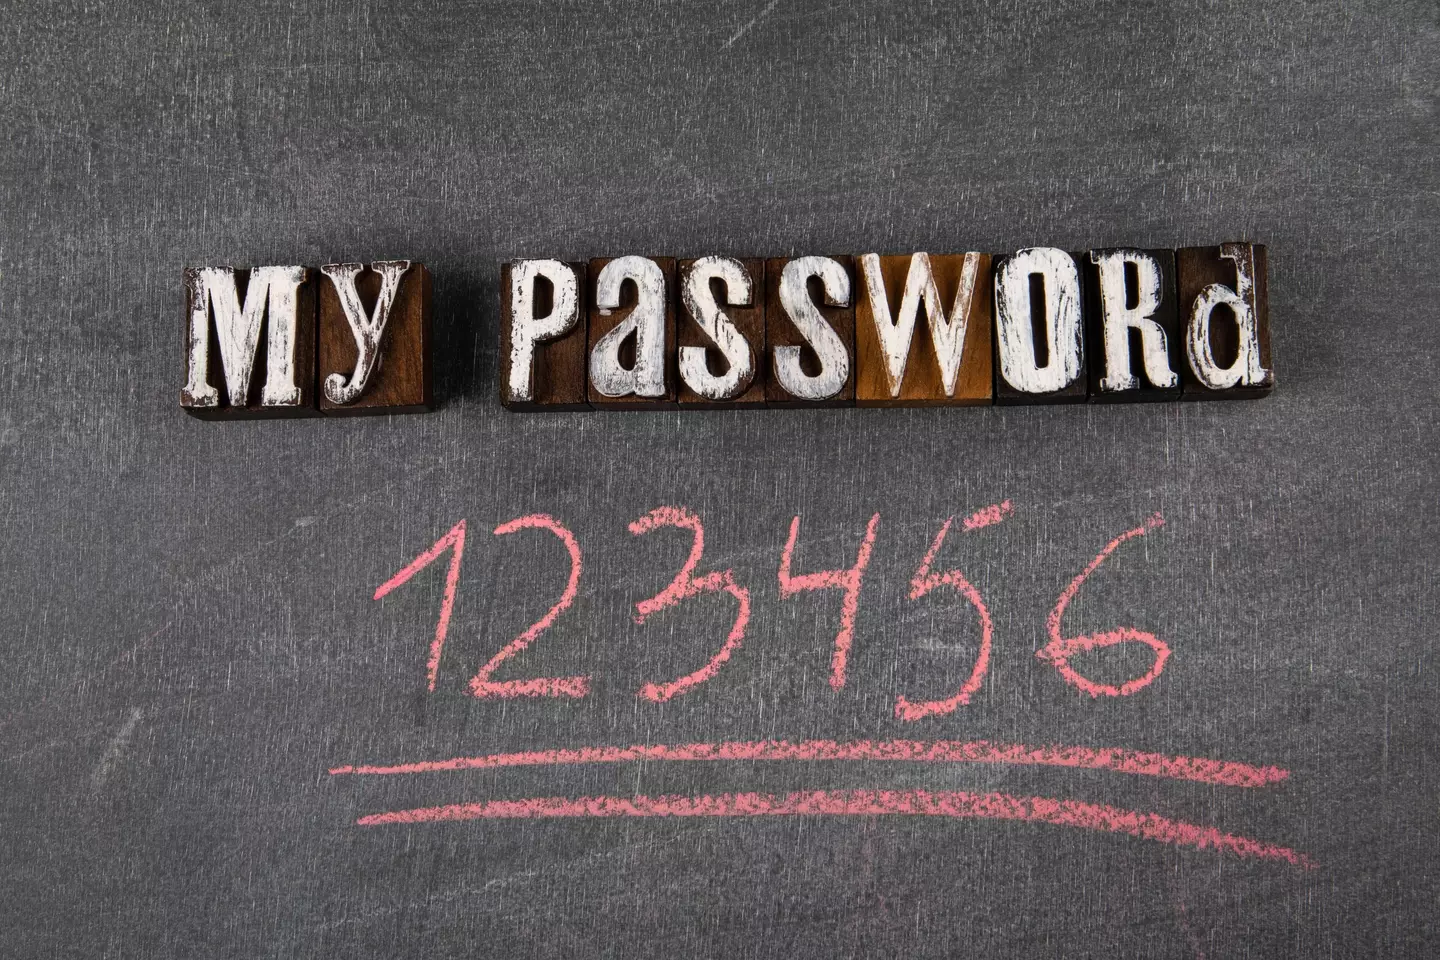 If this is your password, please change it — immediately.